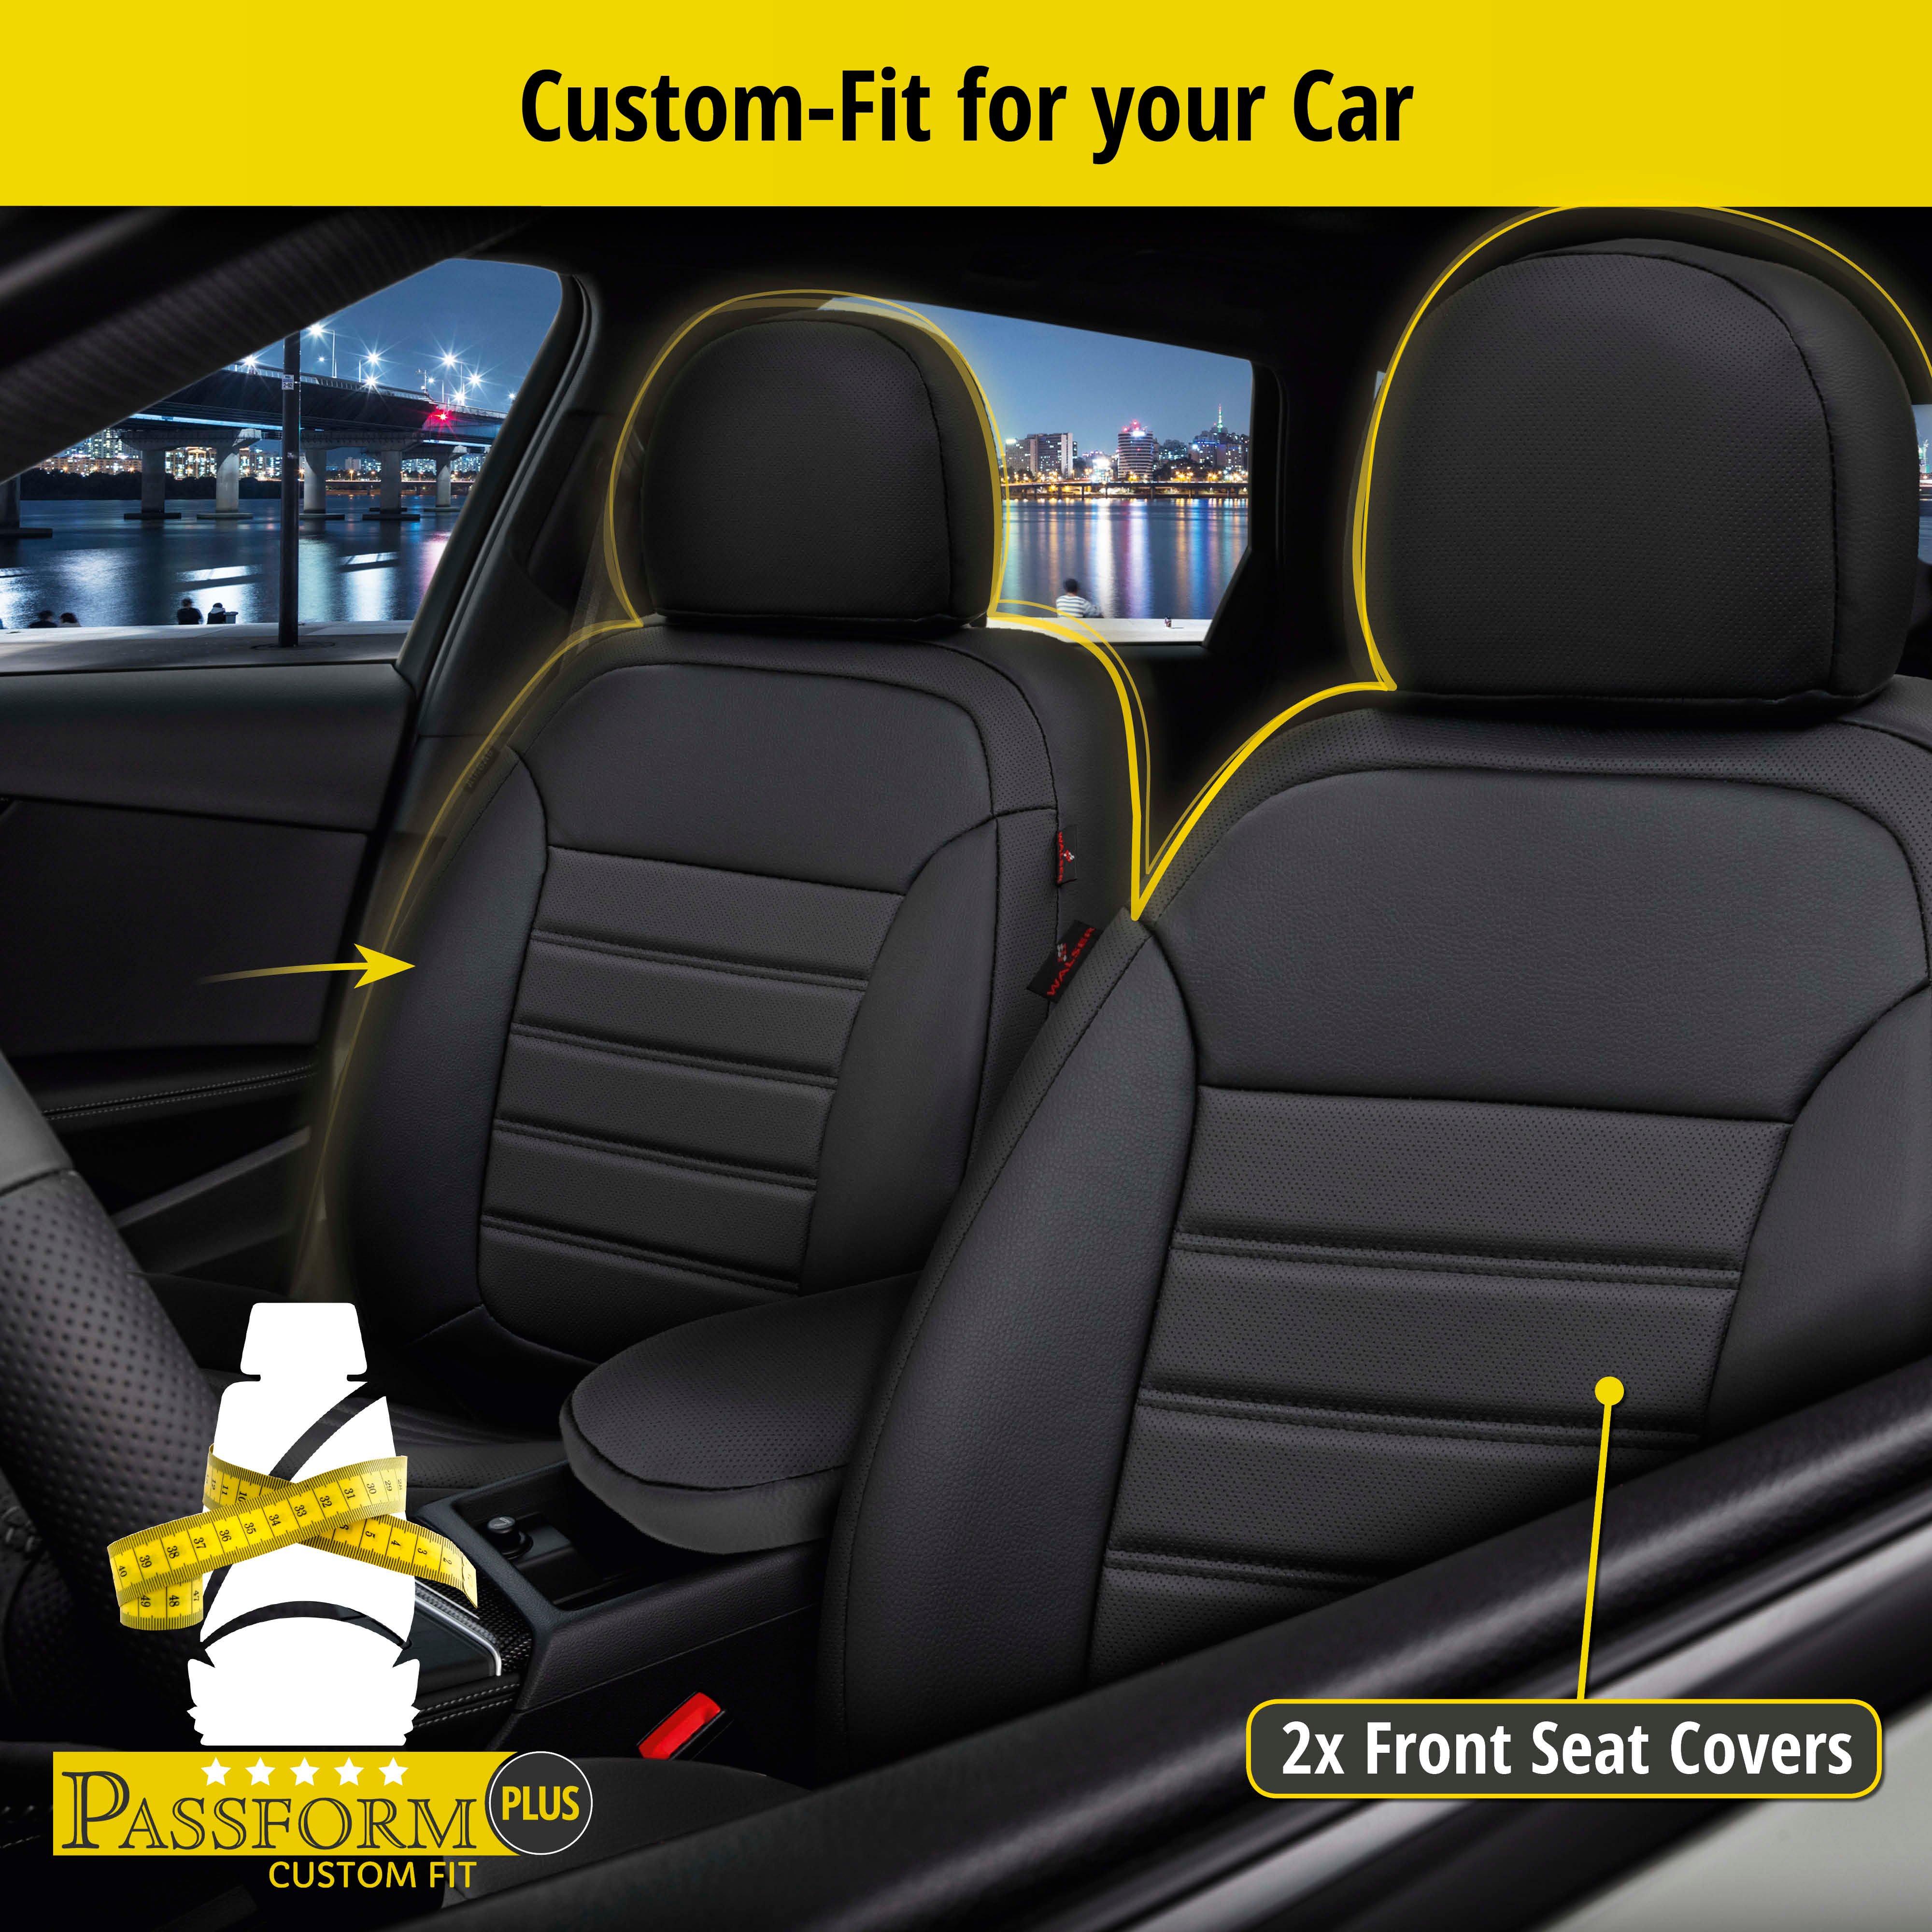 Seat Cover Robusto for Skoda Fabia 2014-Today, 2 seat covers for normal seats